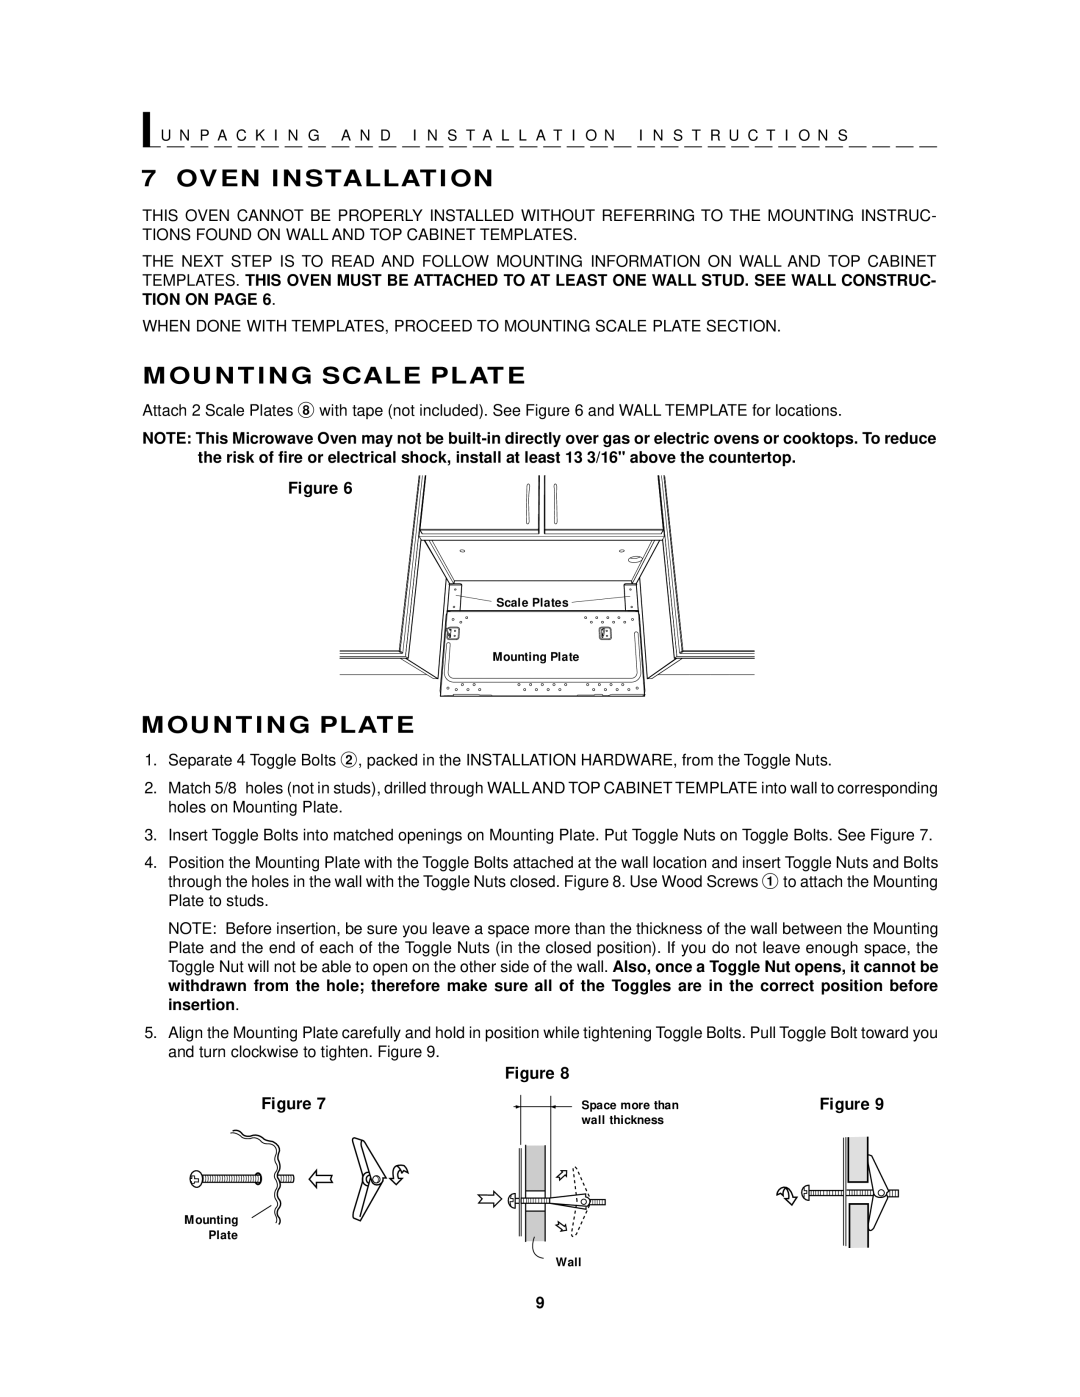 Sharp R-1201, R-1200 operation manual Oven Installation, Mounting Scale Plate, Mounting Plate 